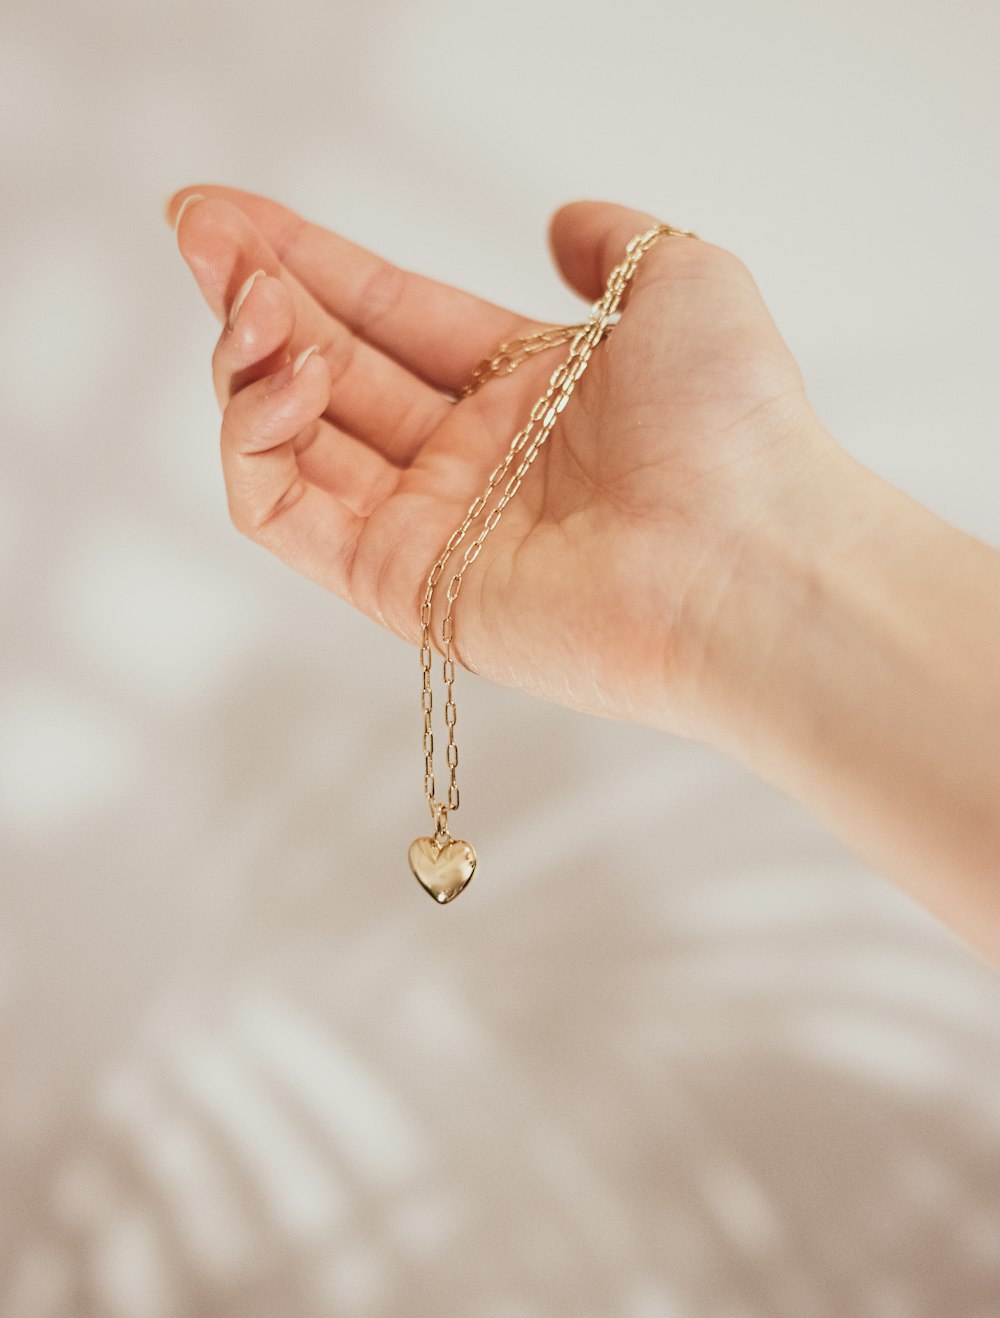 a hand holding a gold heart charm on a chain